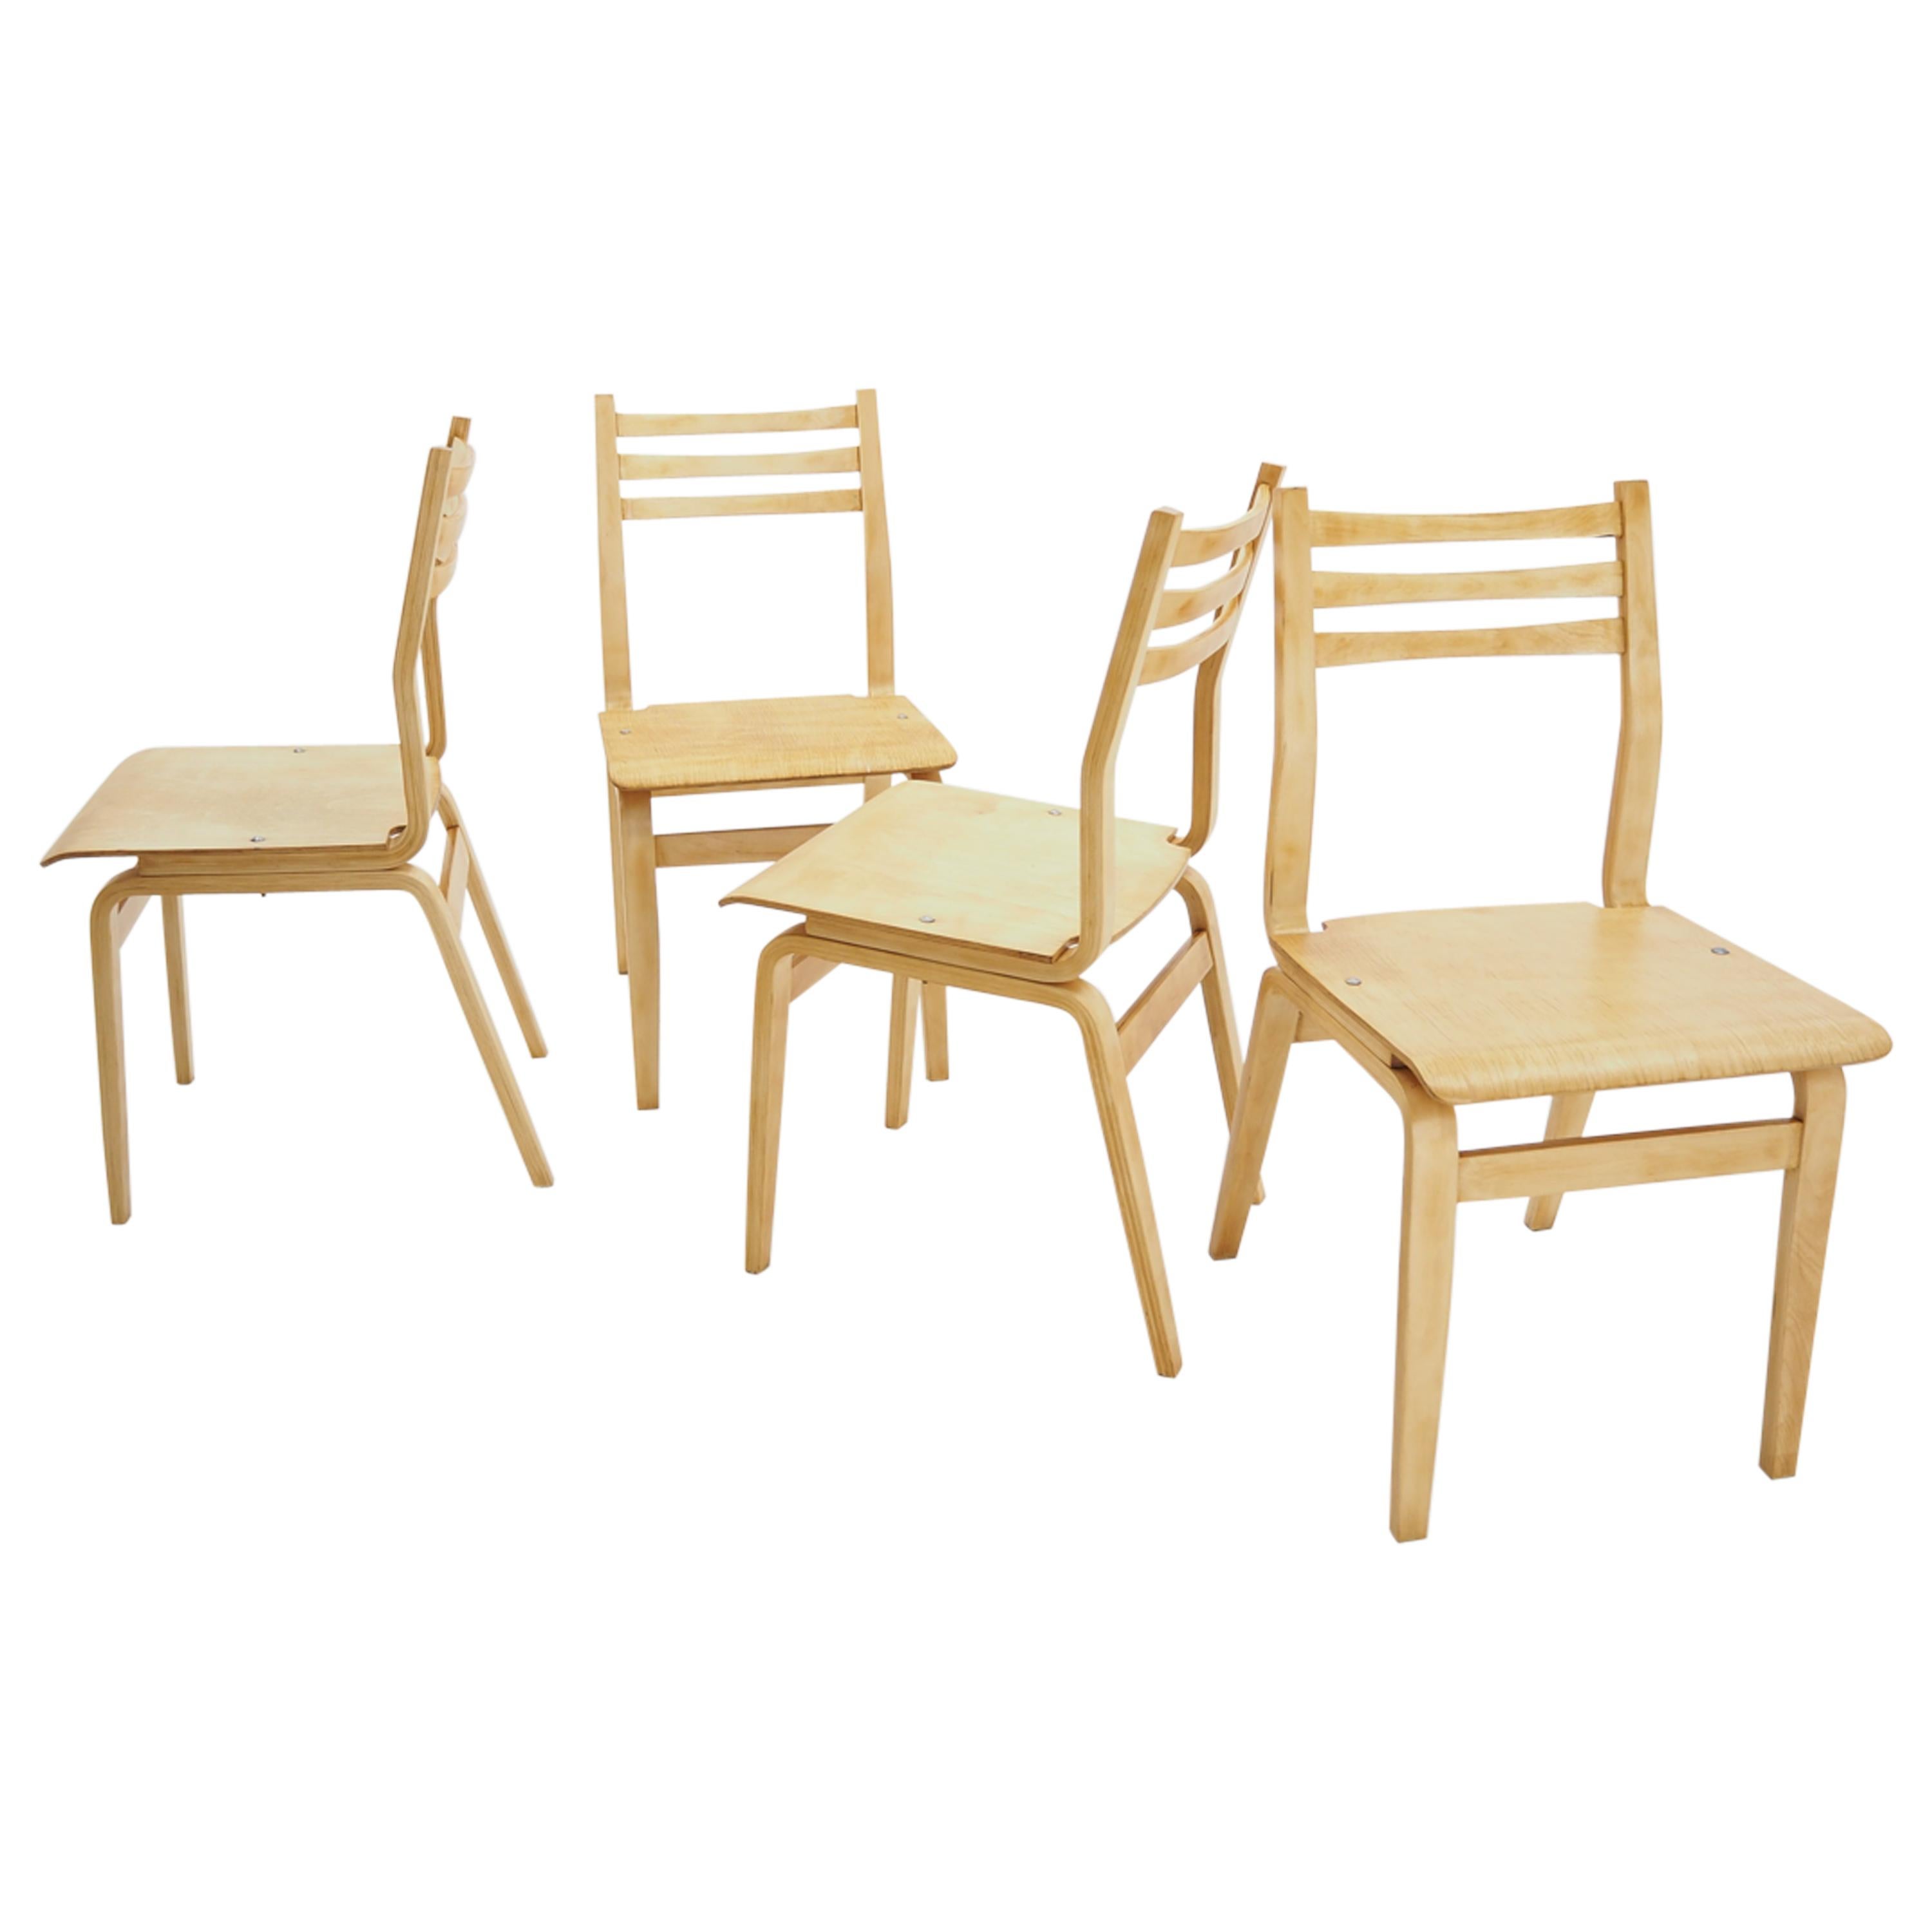 Midcentury Set of 4 Wood Dining Room Chairs 1970s